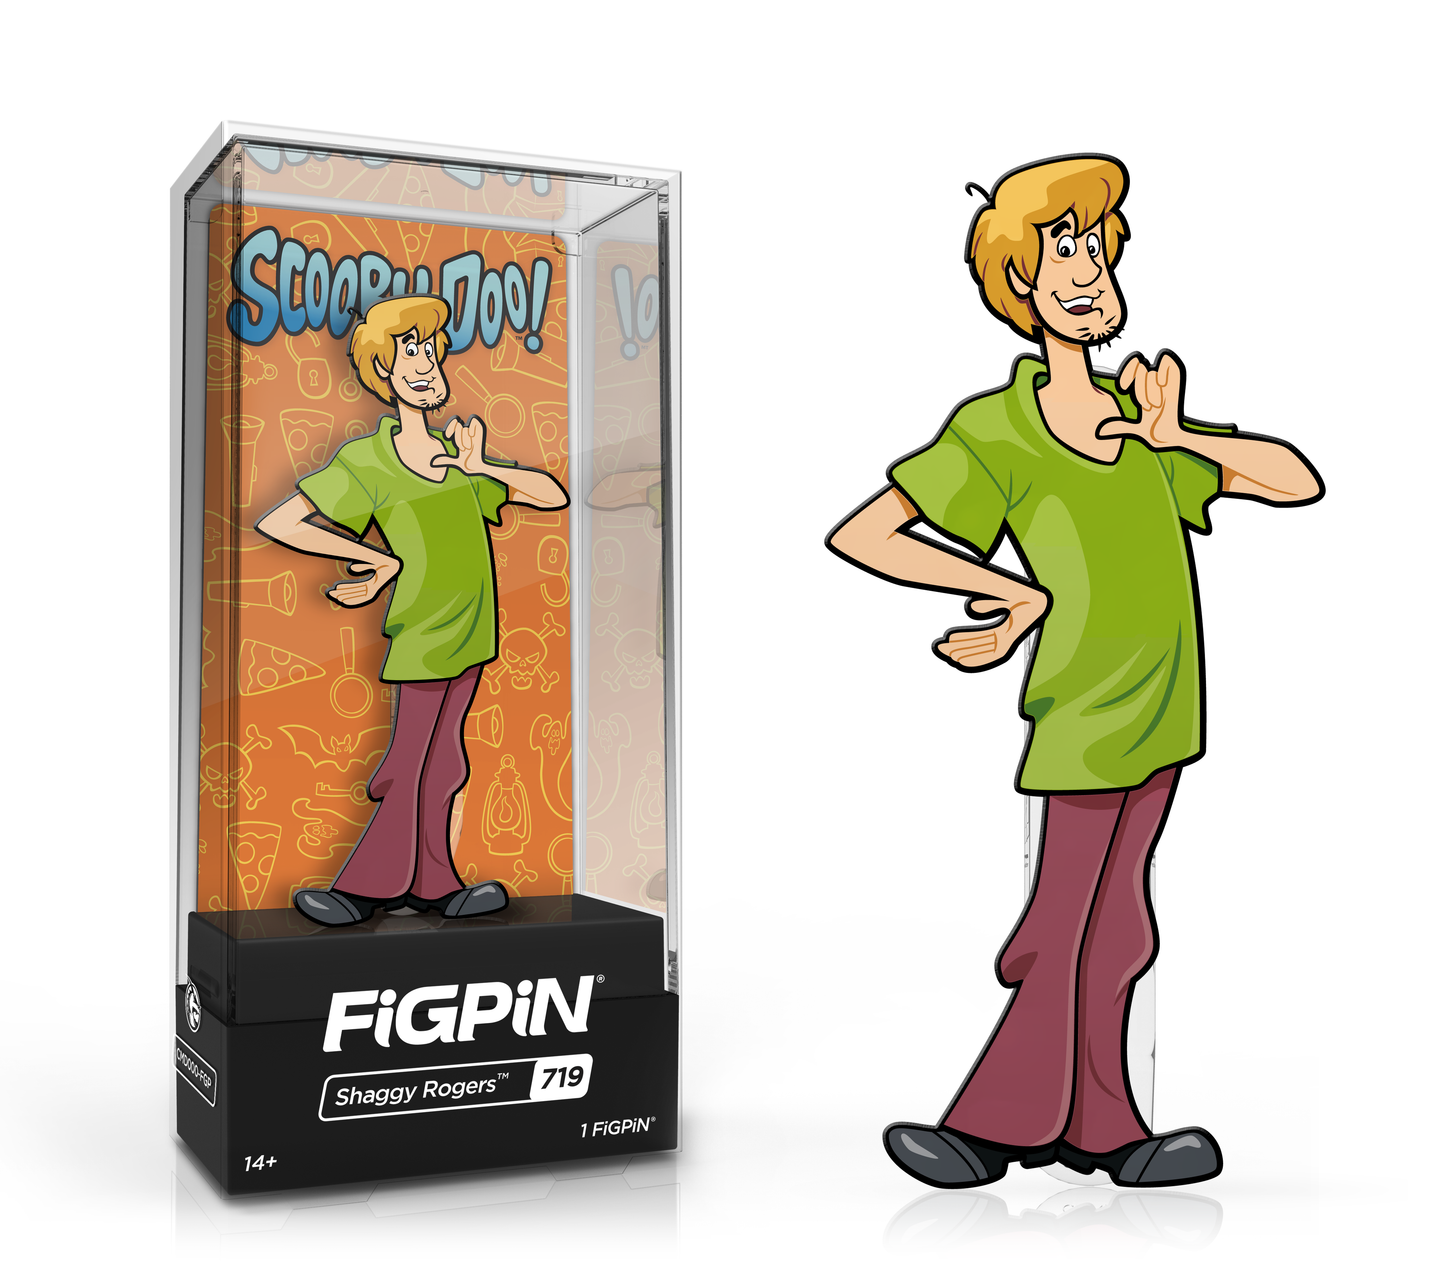 Shaggy Rogers #719 - Scooby-Doo - FiGPiN